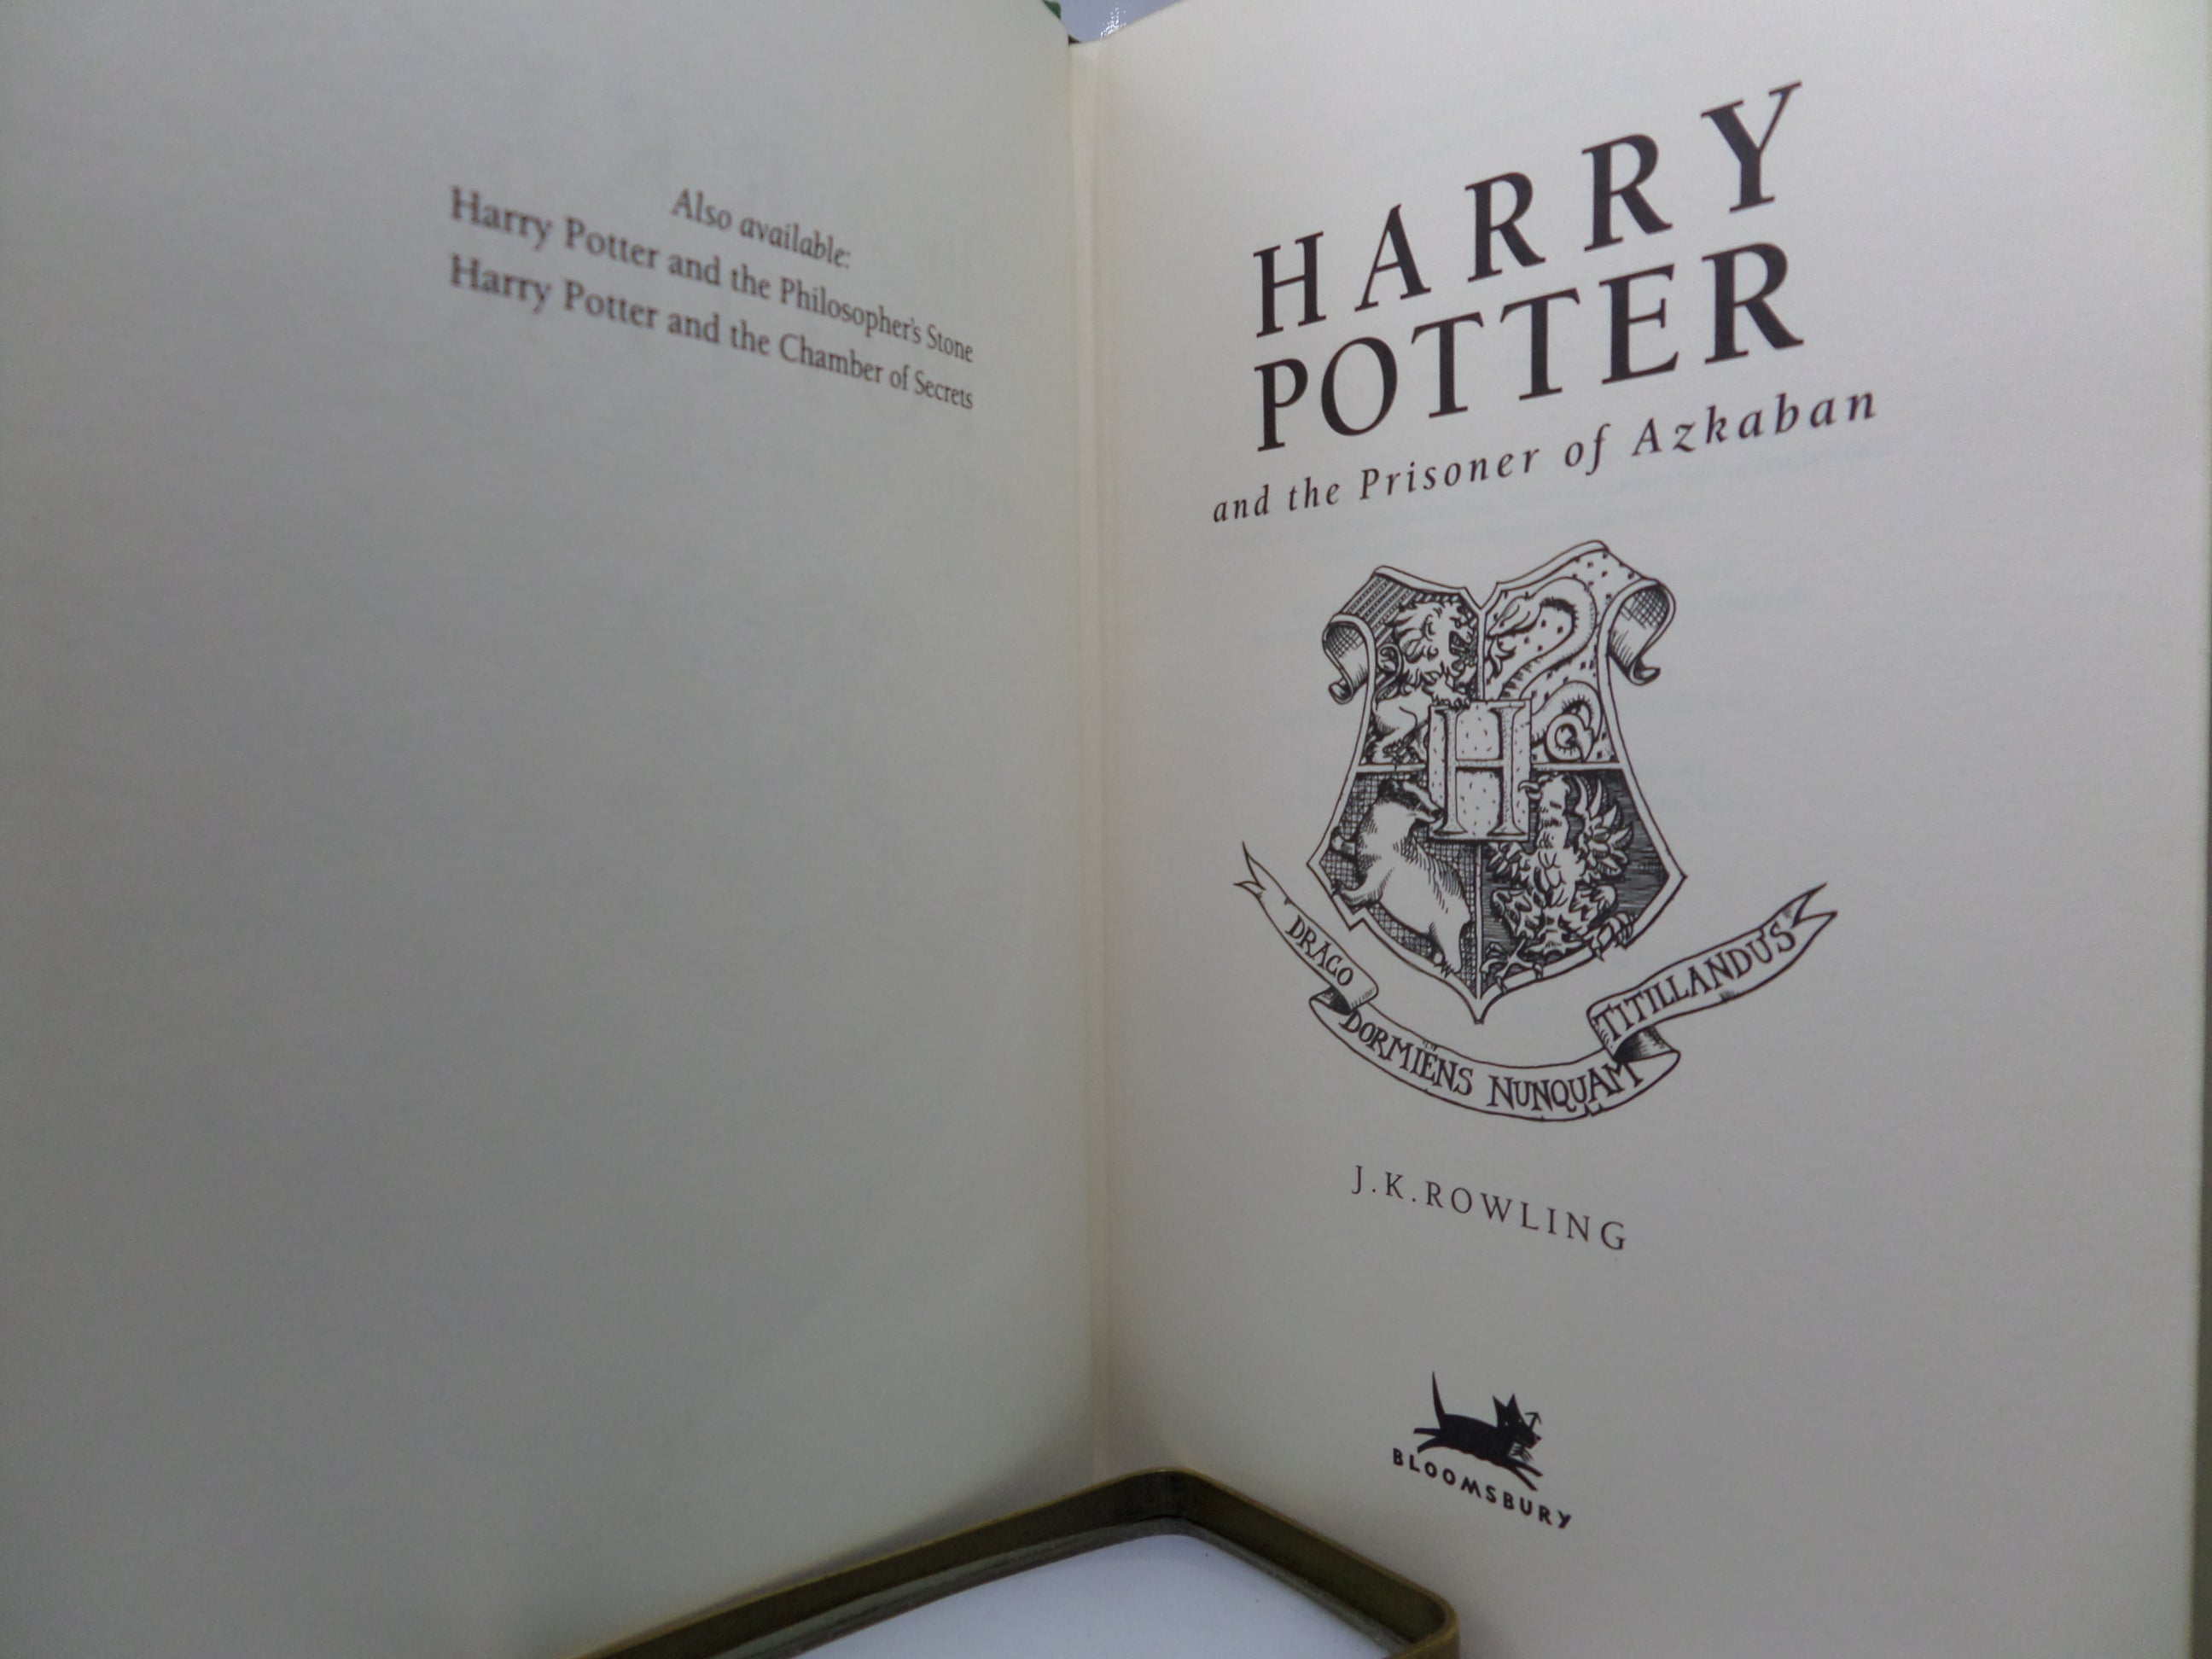 HARRY POTTER AND THE PRISONER OF AZKABAN 1999 J.K. ROWLING DELUXE EDITION